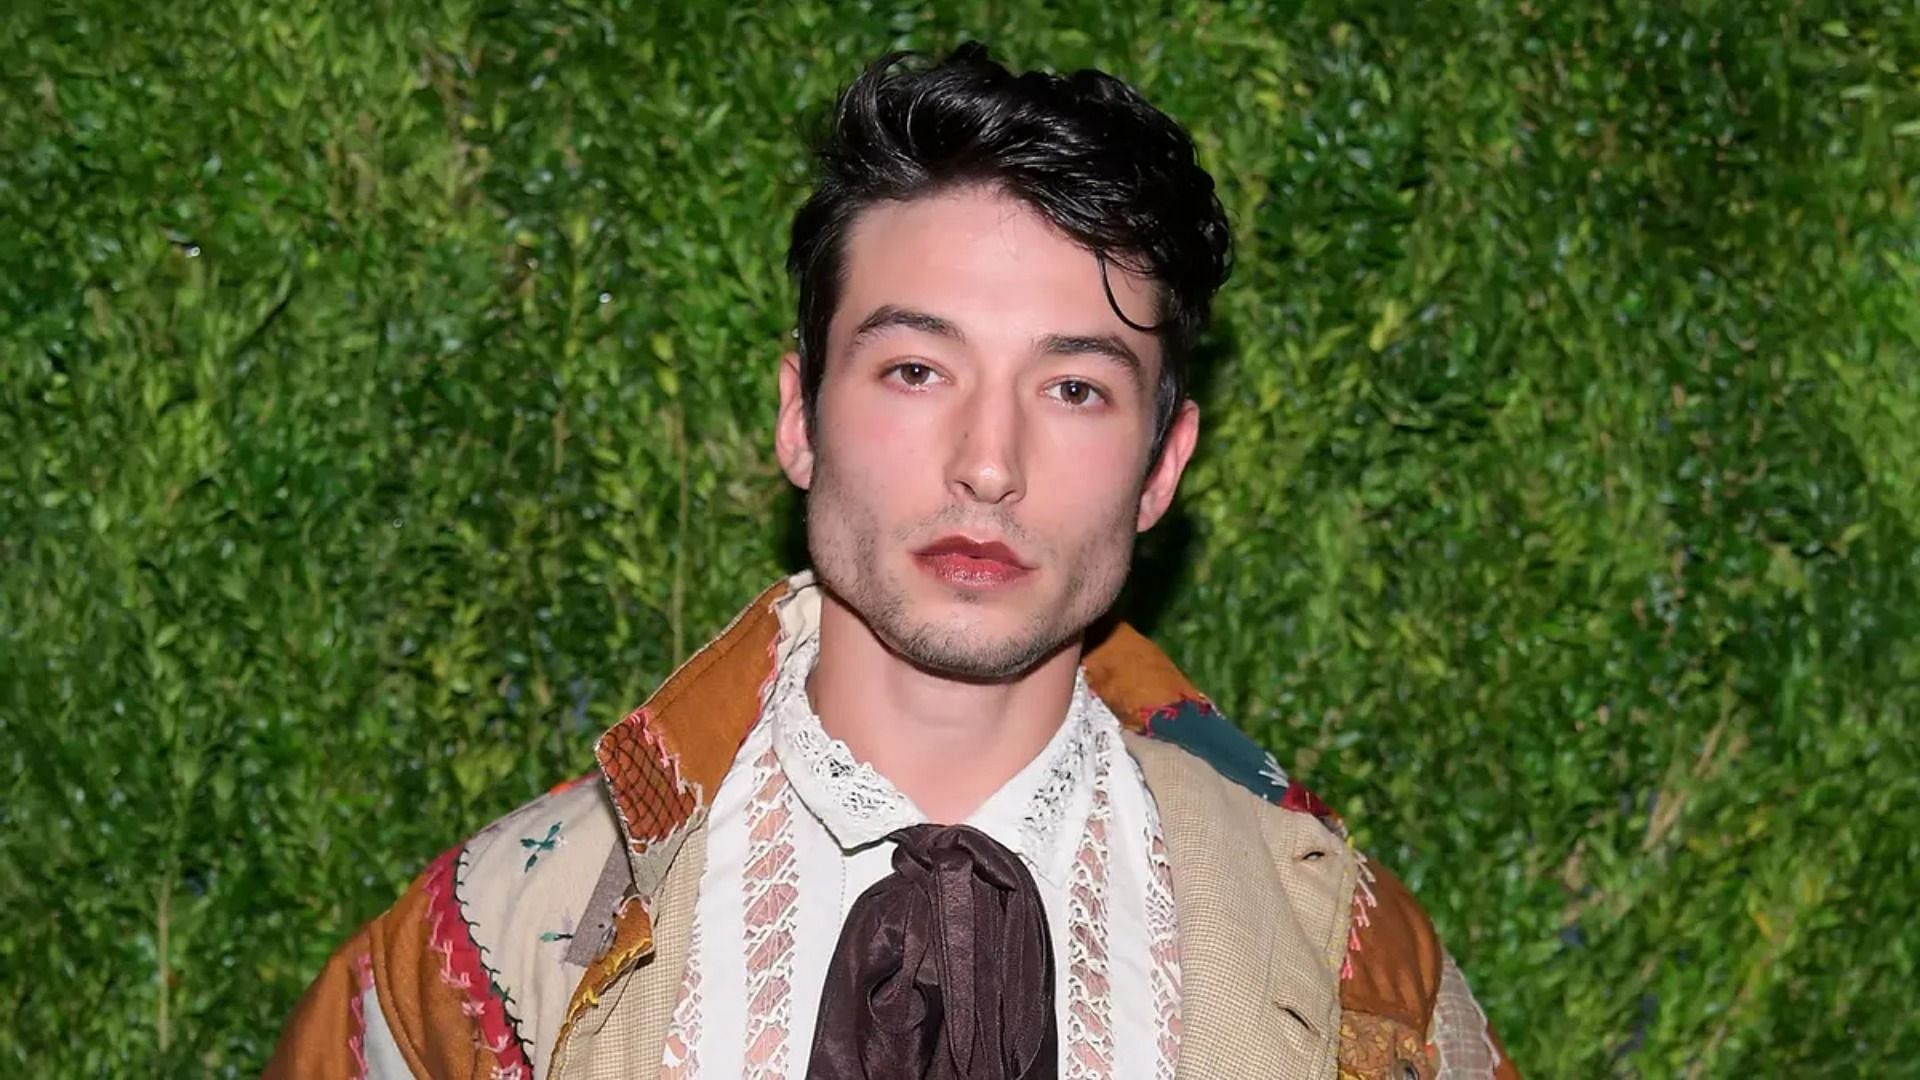 Ezra Miller was arrested on March 28 after he became agitated when people in a pub started singing karaoke. (Image via Getty Images/Roy Rochlin)